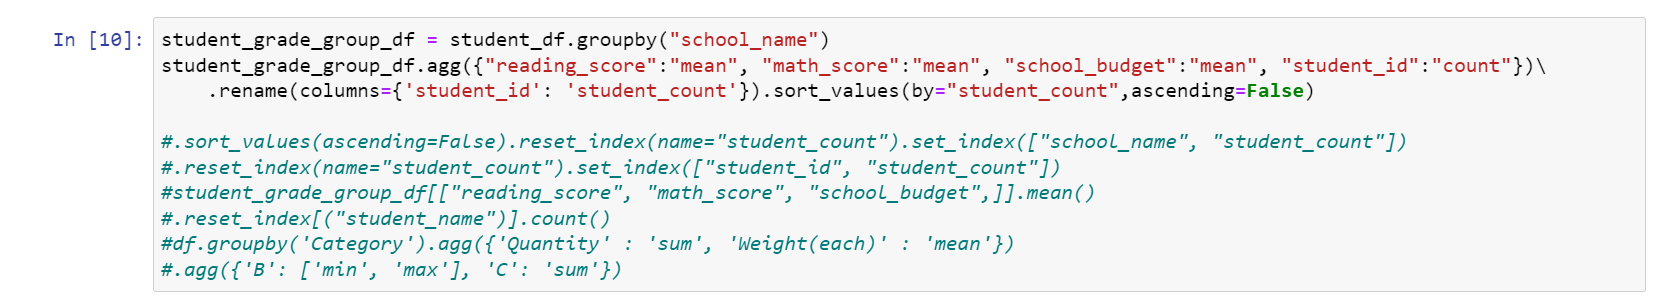 code_scores_budget_student_count_by_school